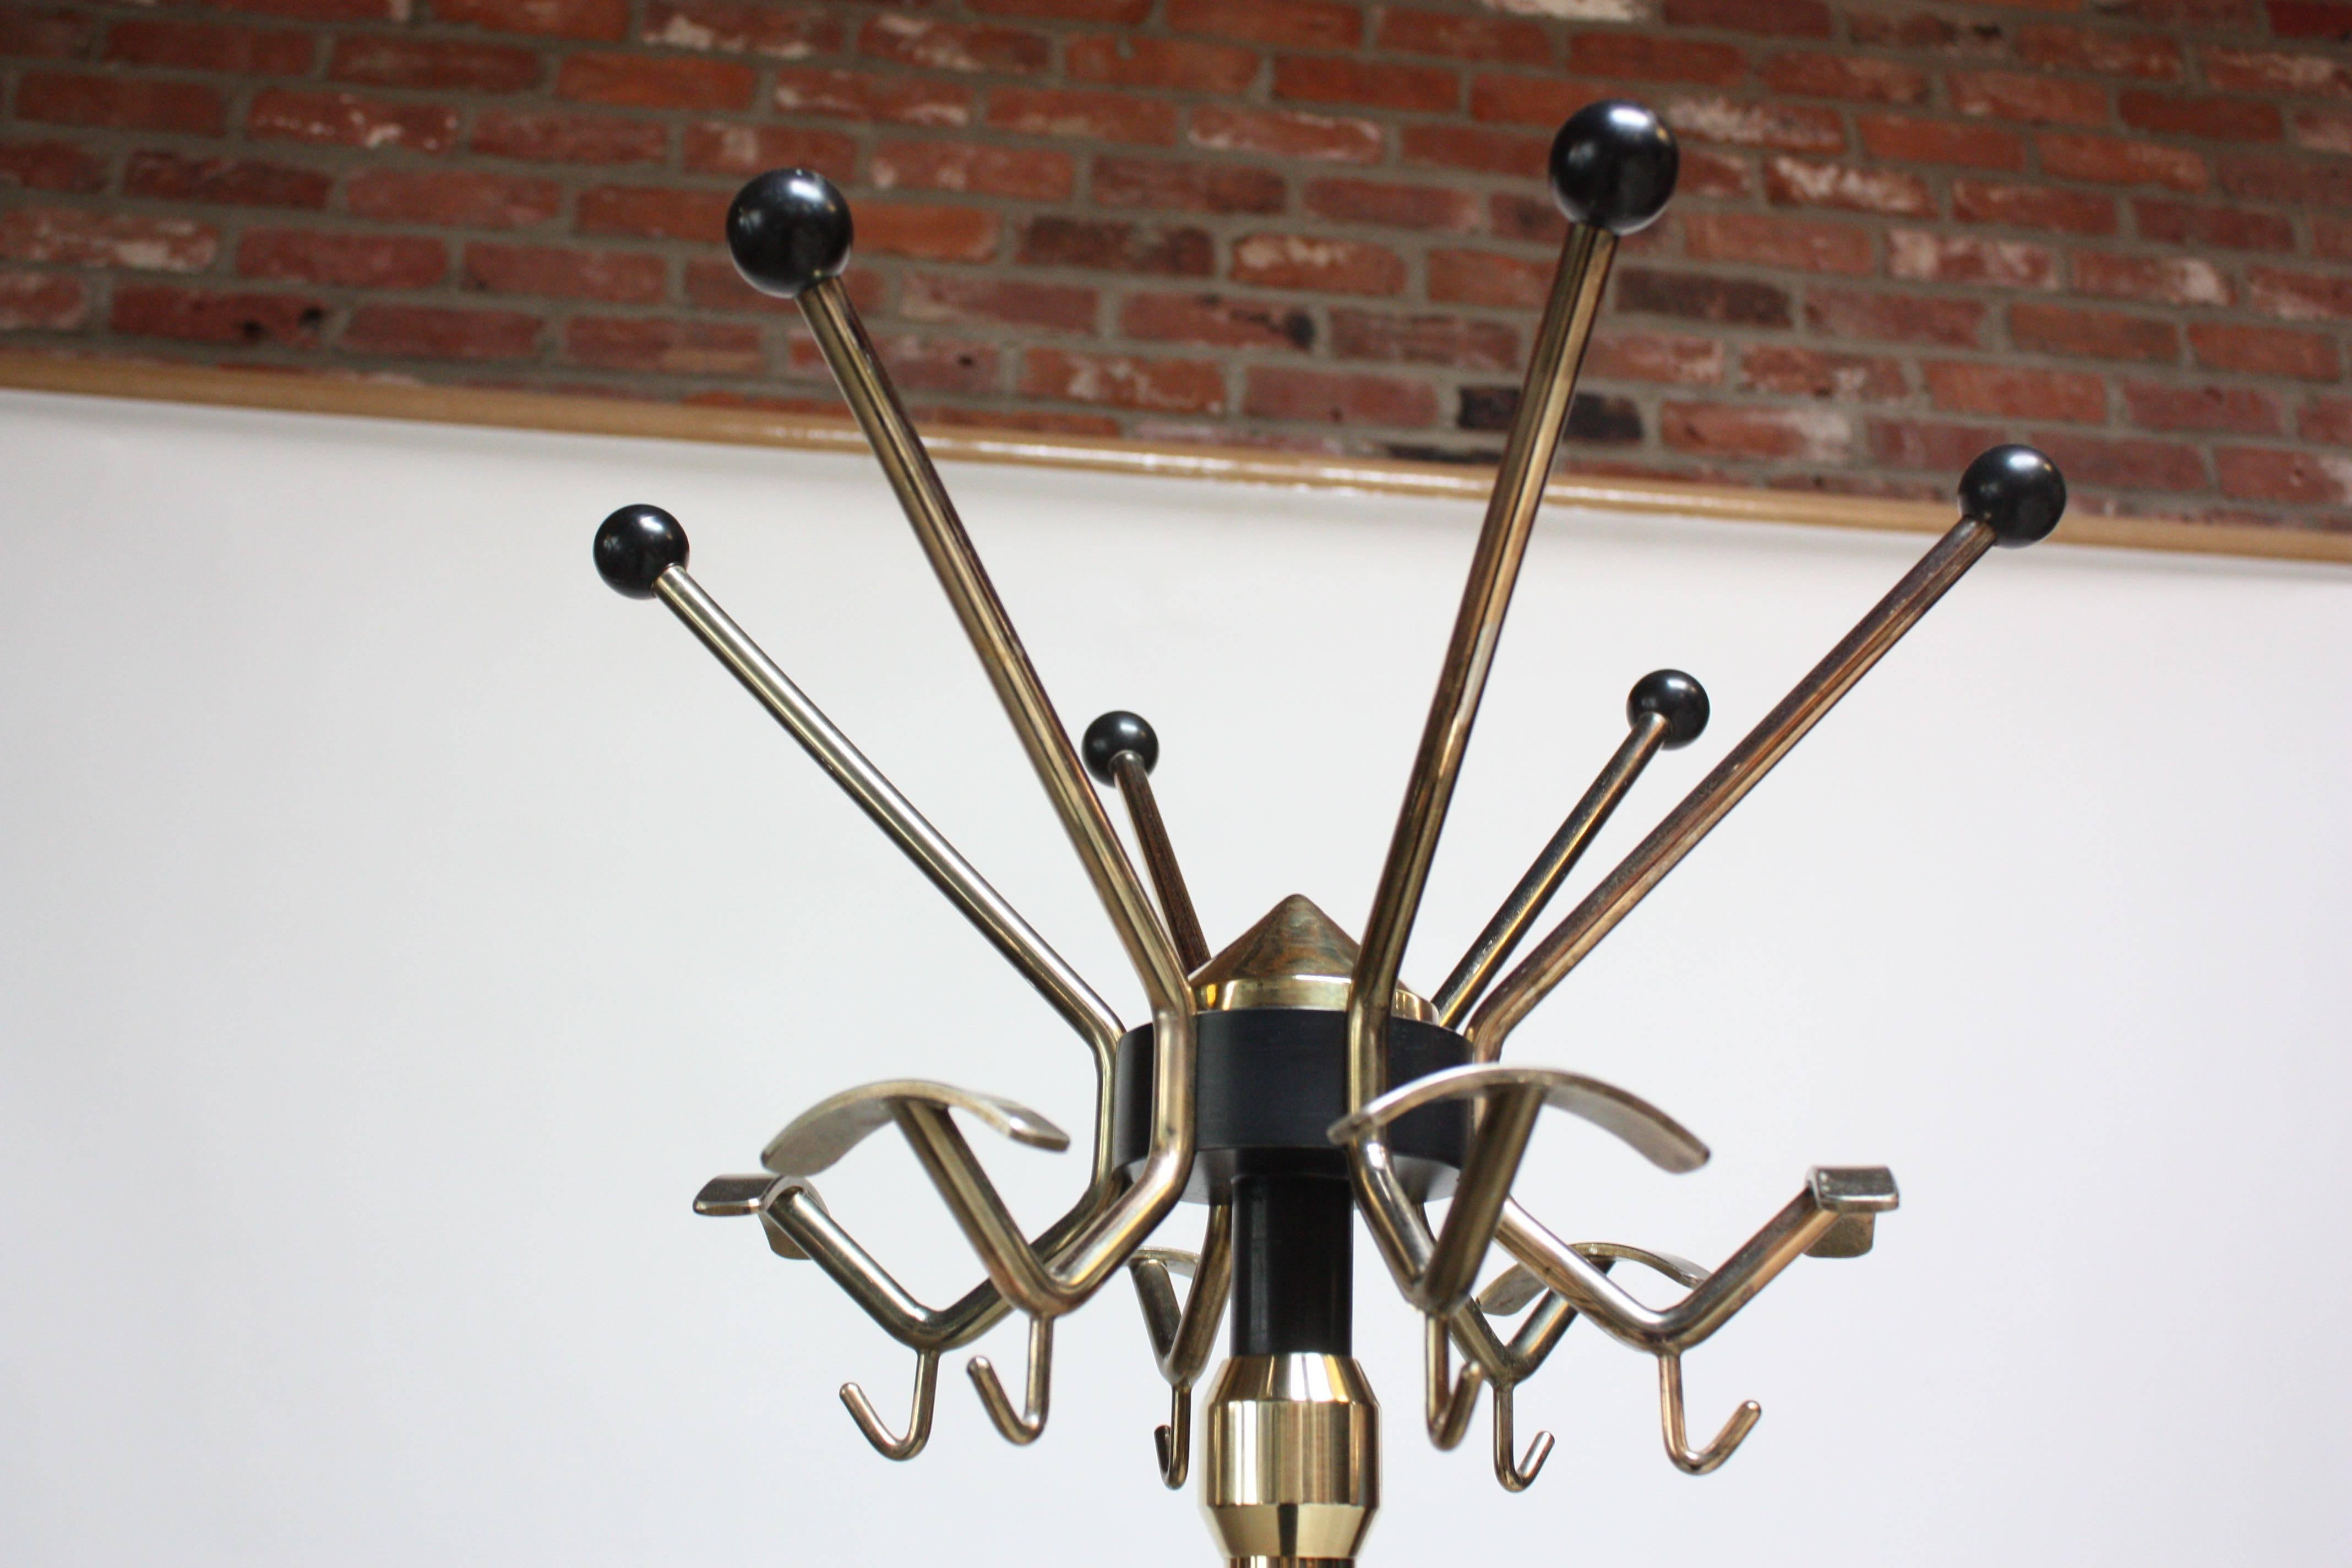 This elegant 1950s Italian Coat / Hat Rack is composed of a swivel-top tier with full-360 degree mobility. The 'x' form painted steel base is supported by cylindrical metal feet.
The top tier (hooks) measures 17